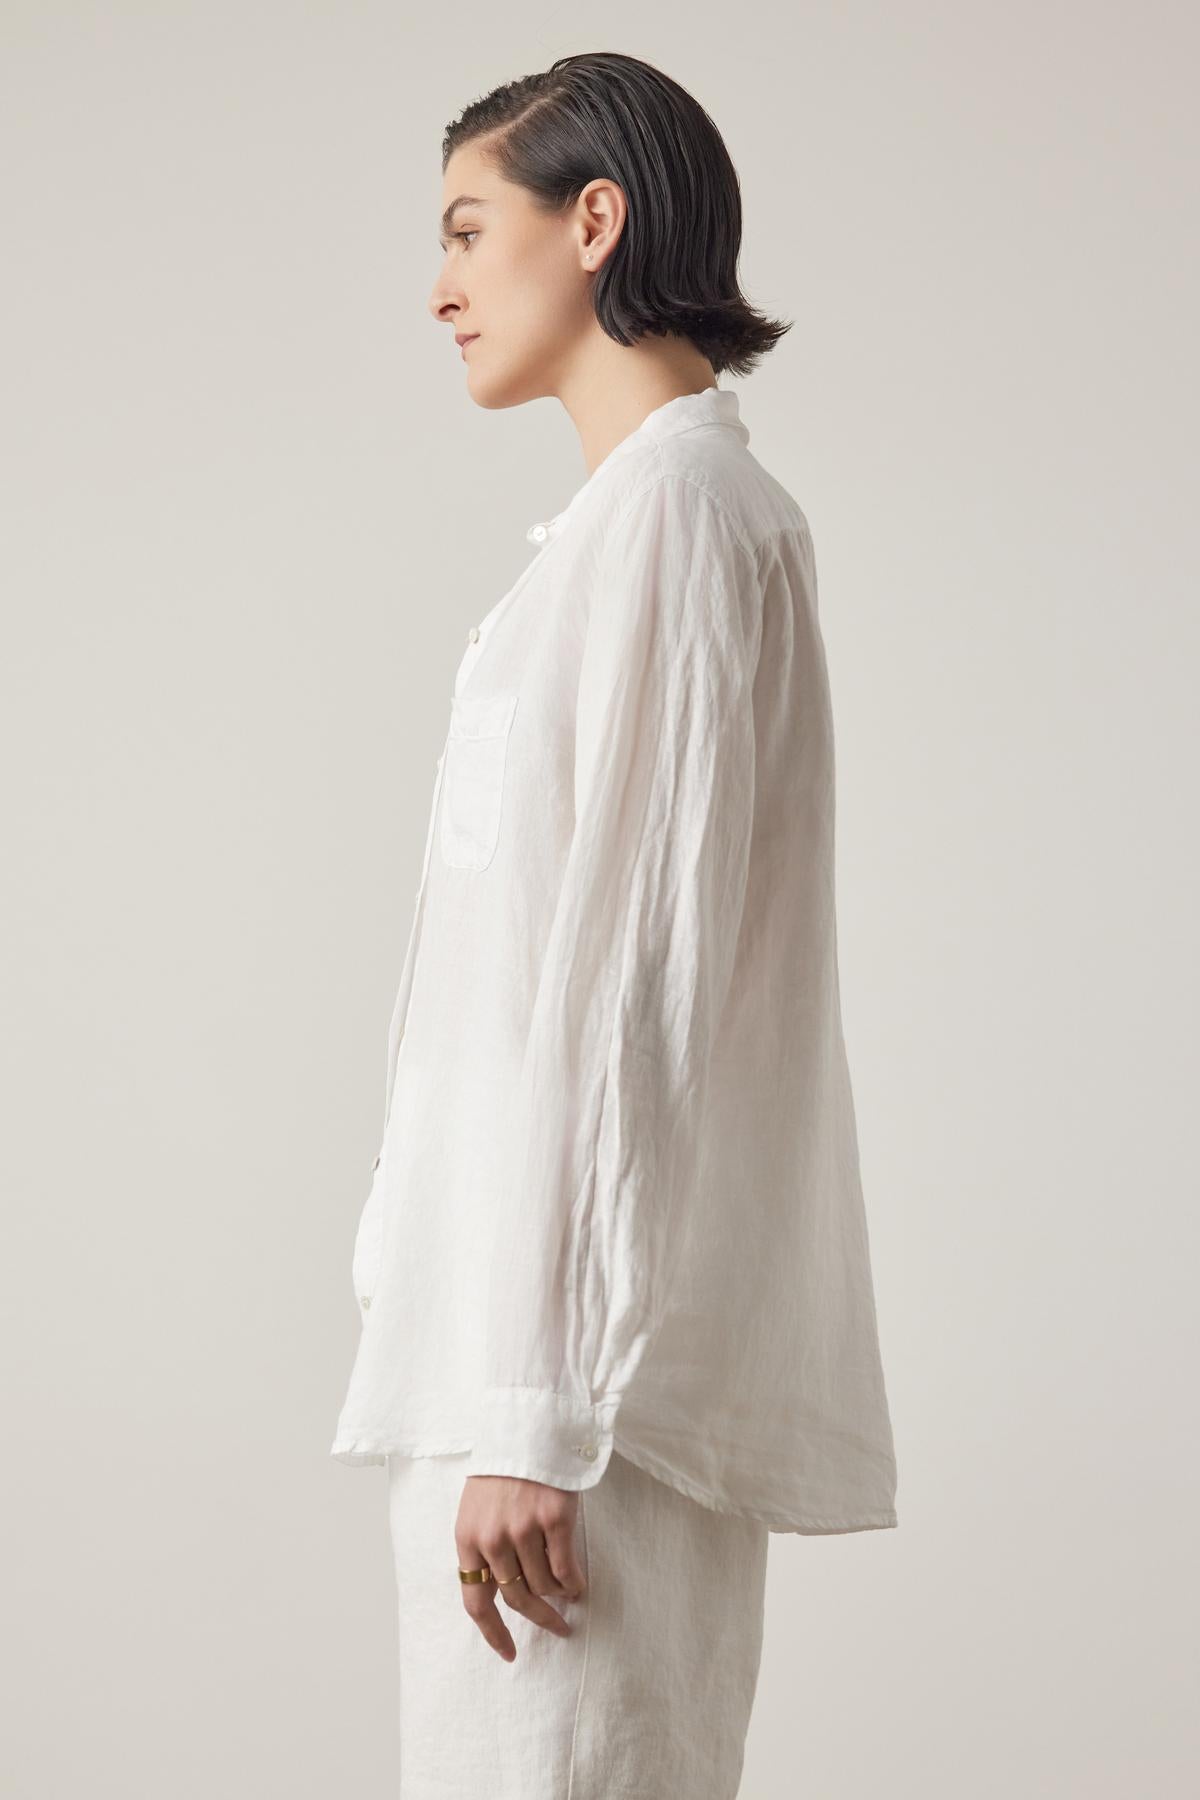   A person with short hair is standing in profile, wearing a loose-fitting, long-sleeved white MULHOLLAND LINEN SHIRT by Velvet by Jenny Graham with a relaxed silhouette and white pants against a plain background. 